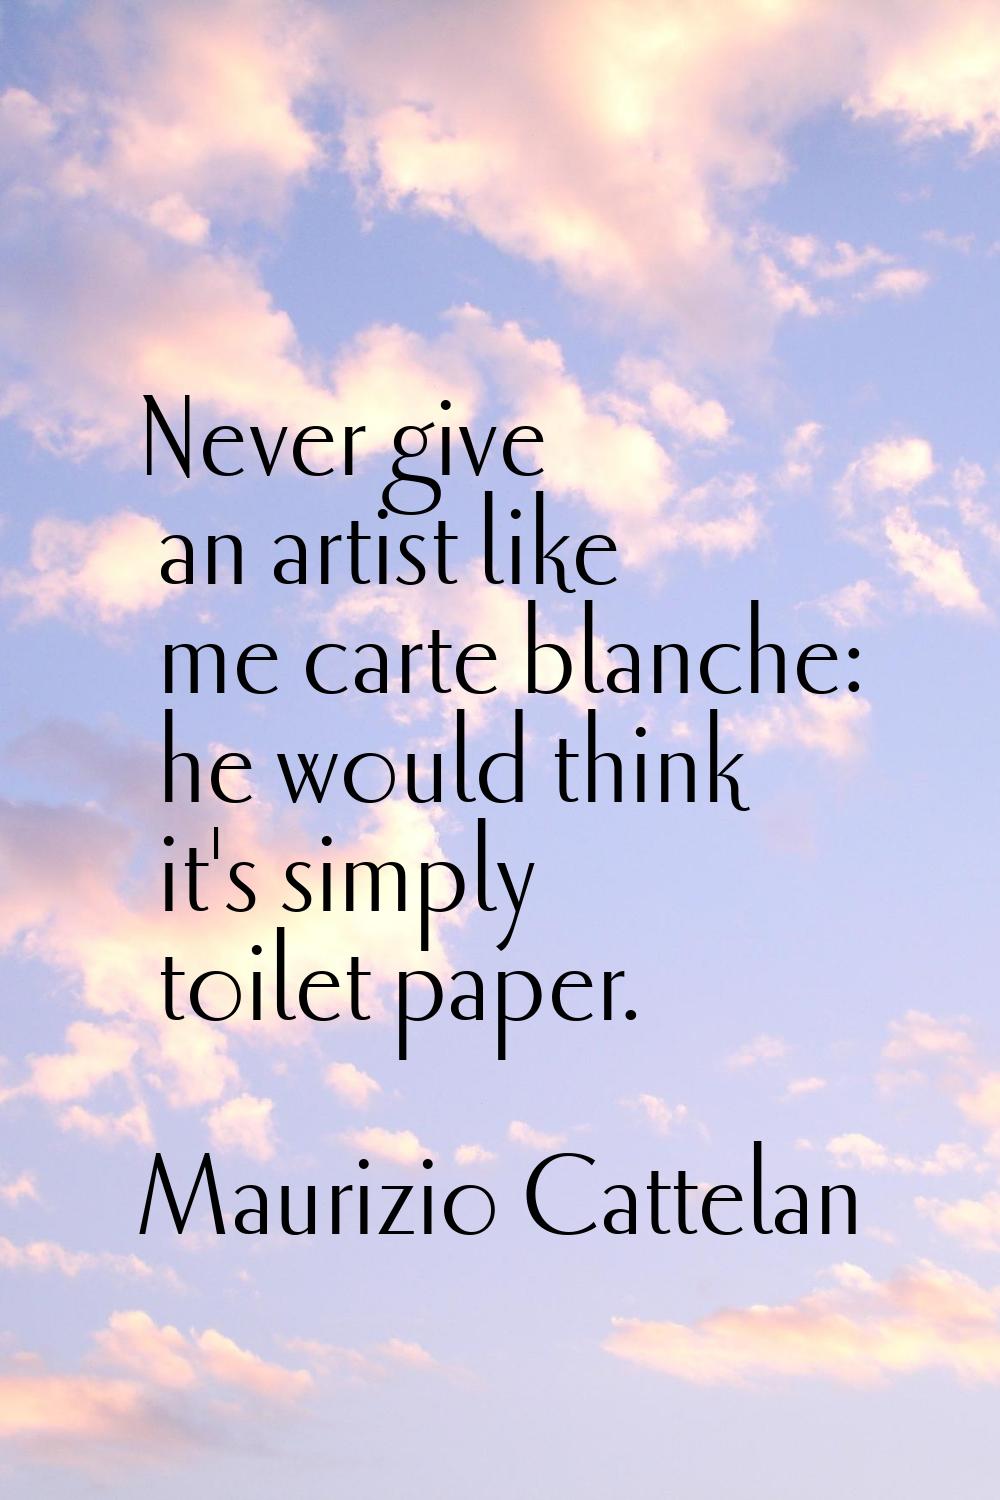 Never give an artist like me carte blanche: he would think it's simply toilet paper.